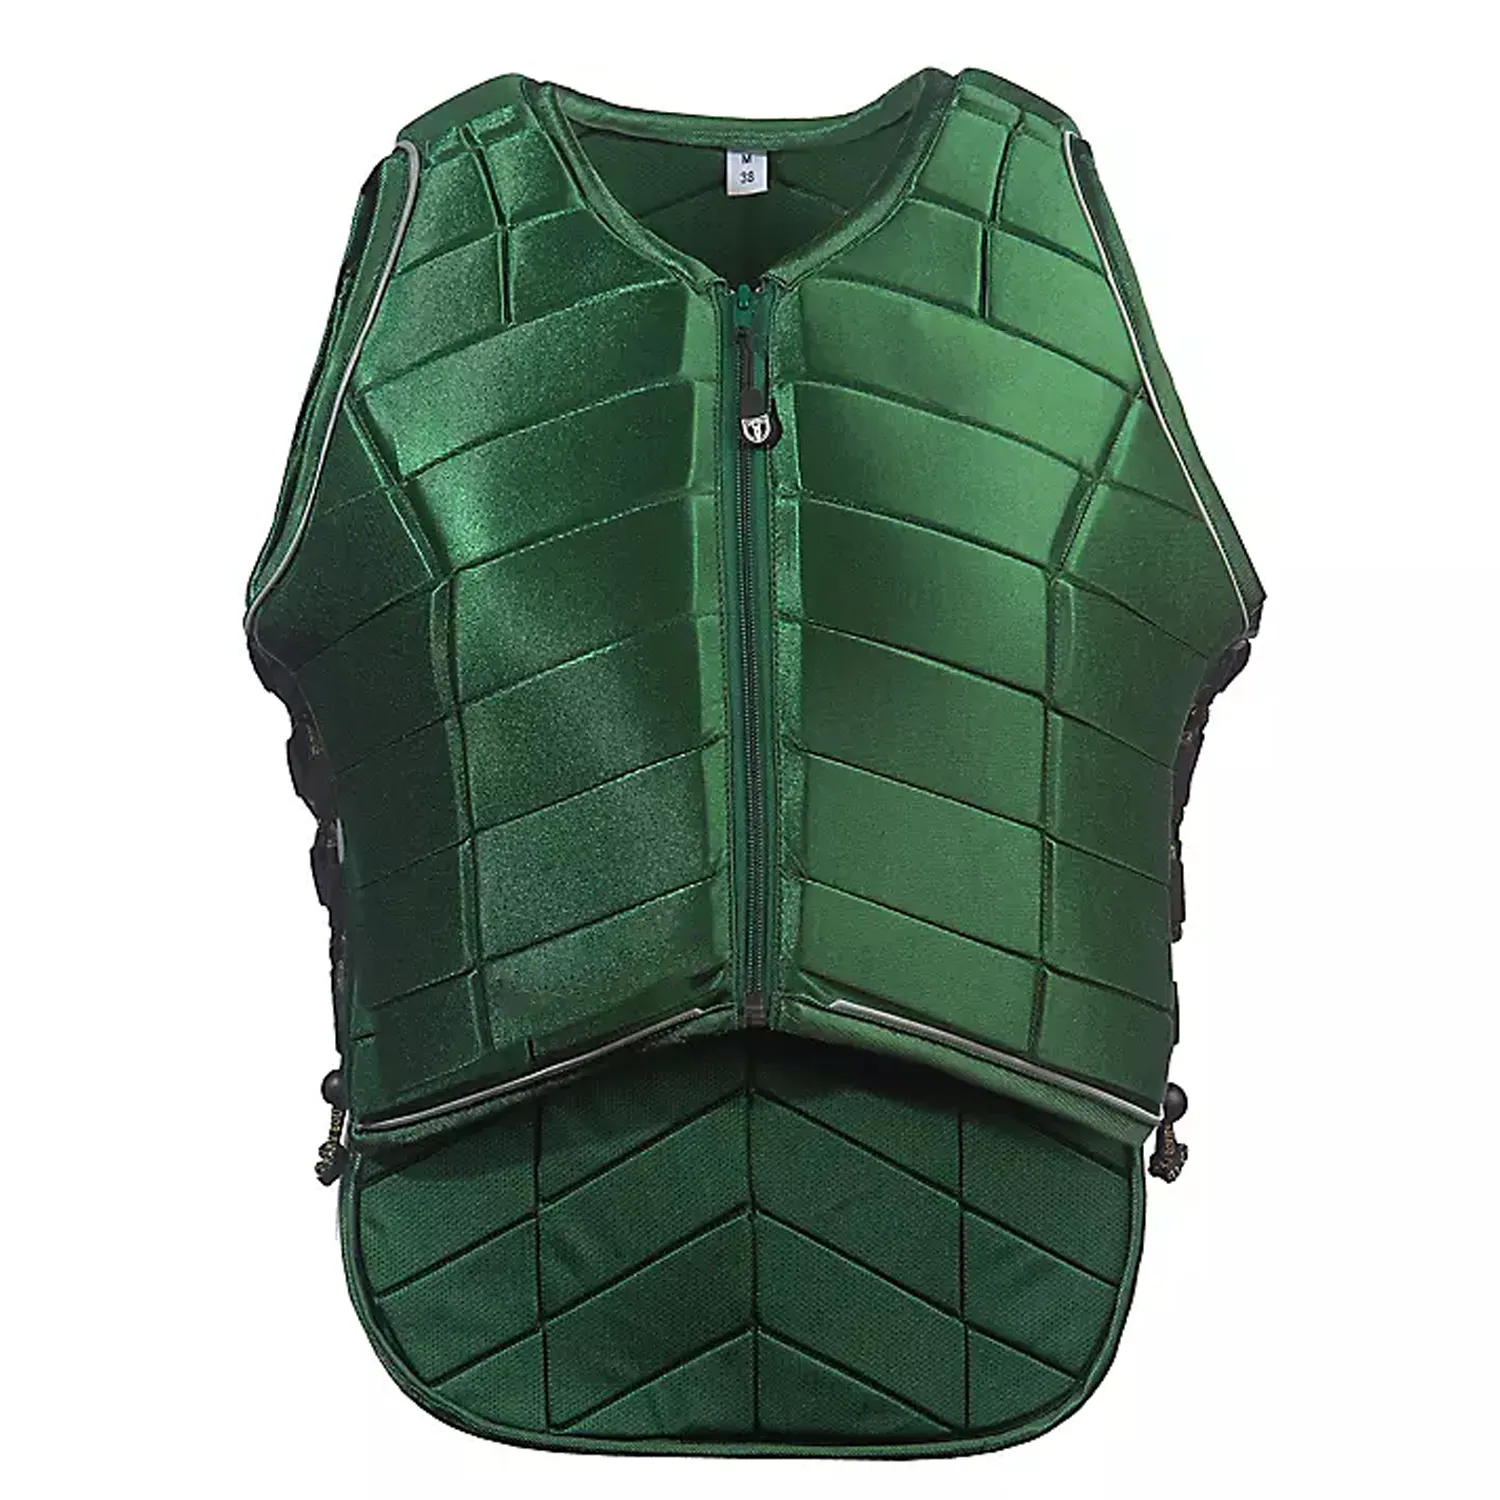 Breathable Lightweight Shock Absorbing EVA Padded Horse Back Riding Safety Vest with Adjustable Fitting 2023